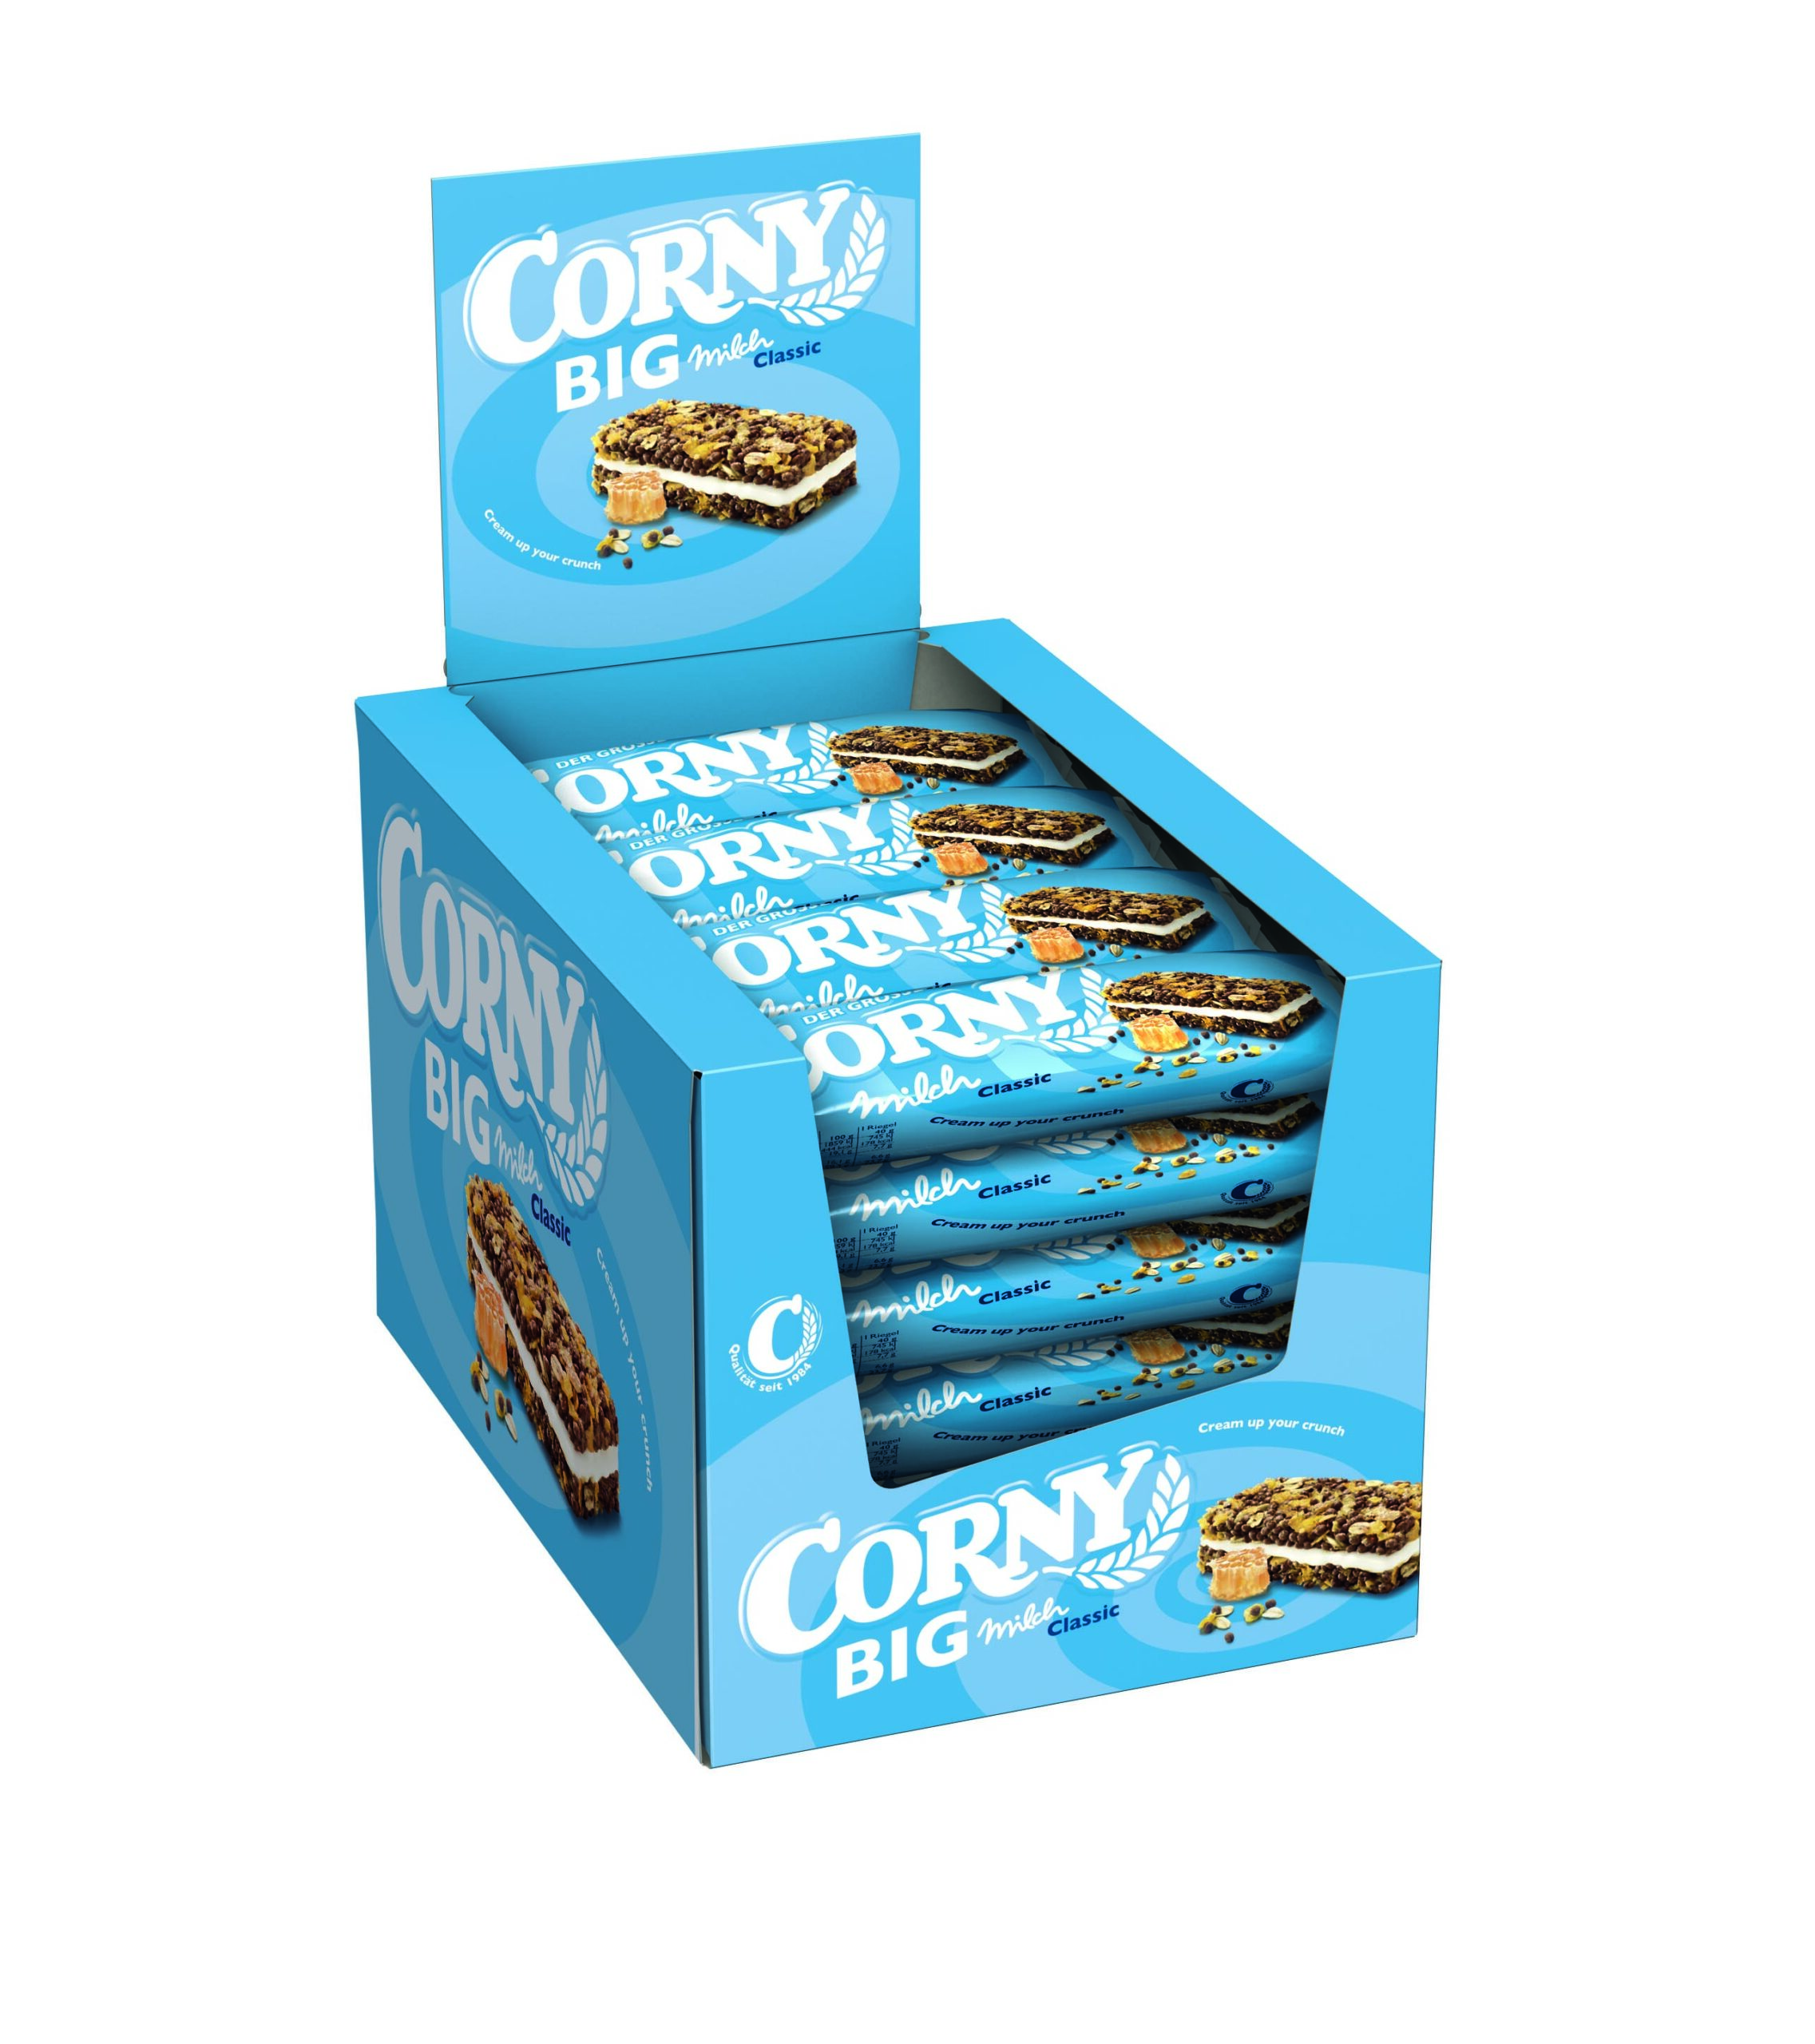 Corny Milch Classic 24x40g Packung